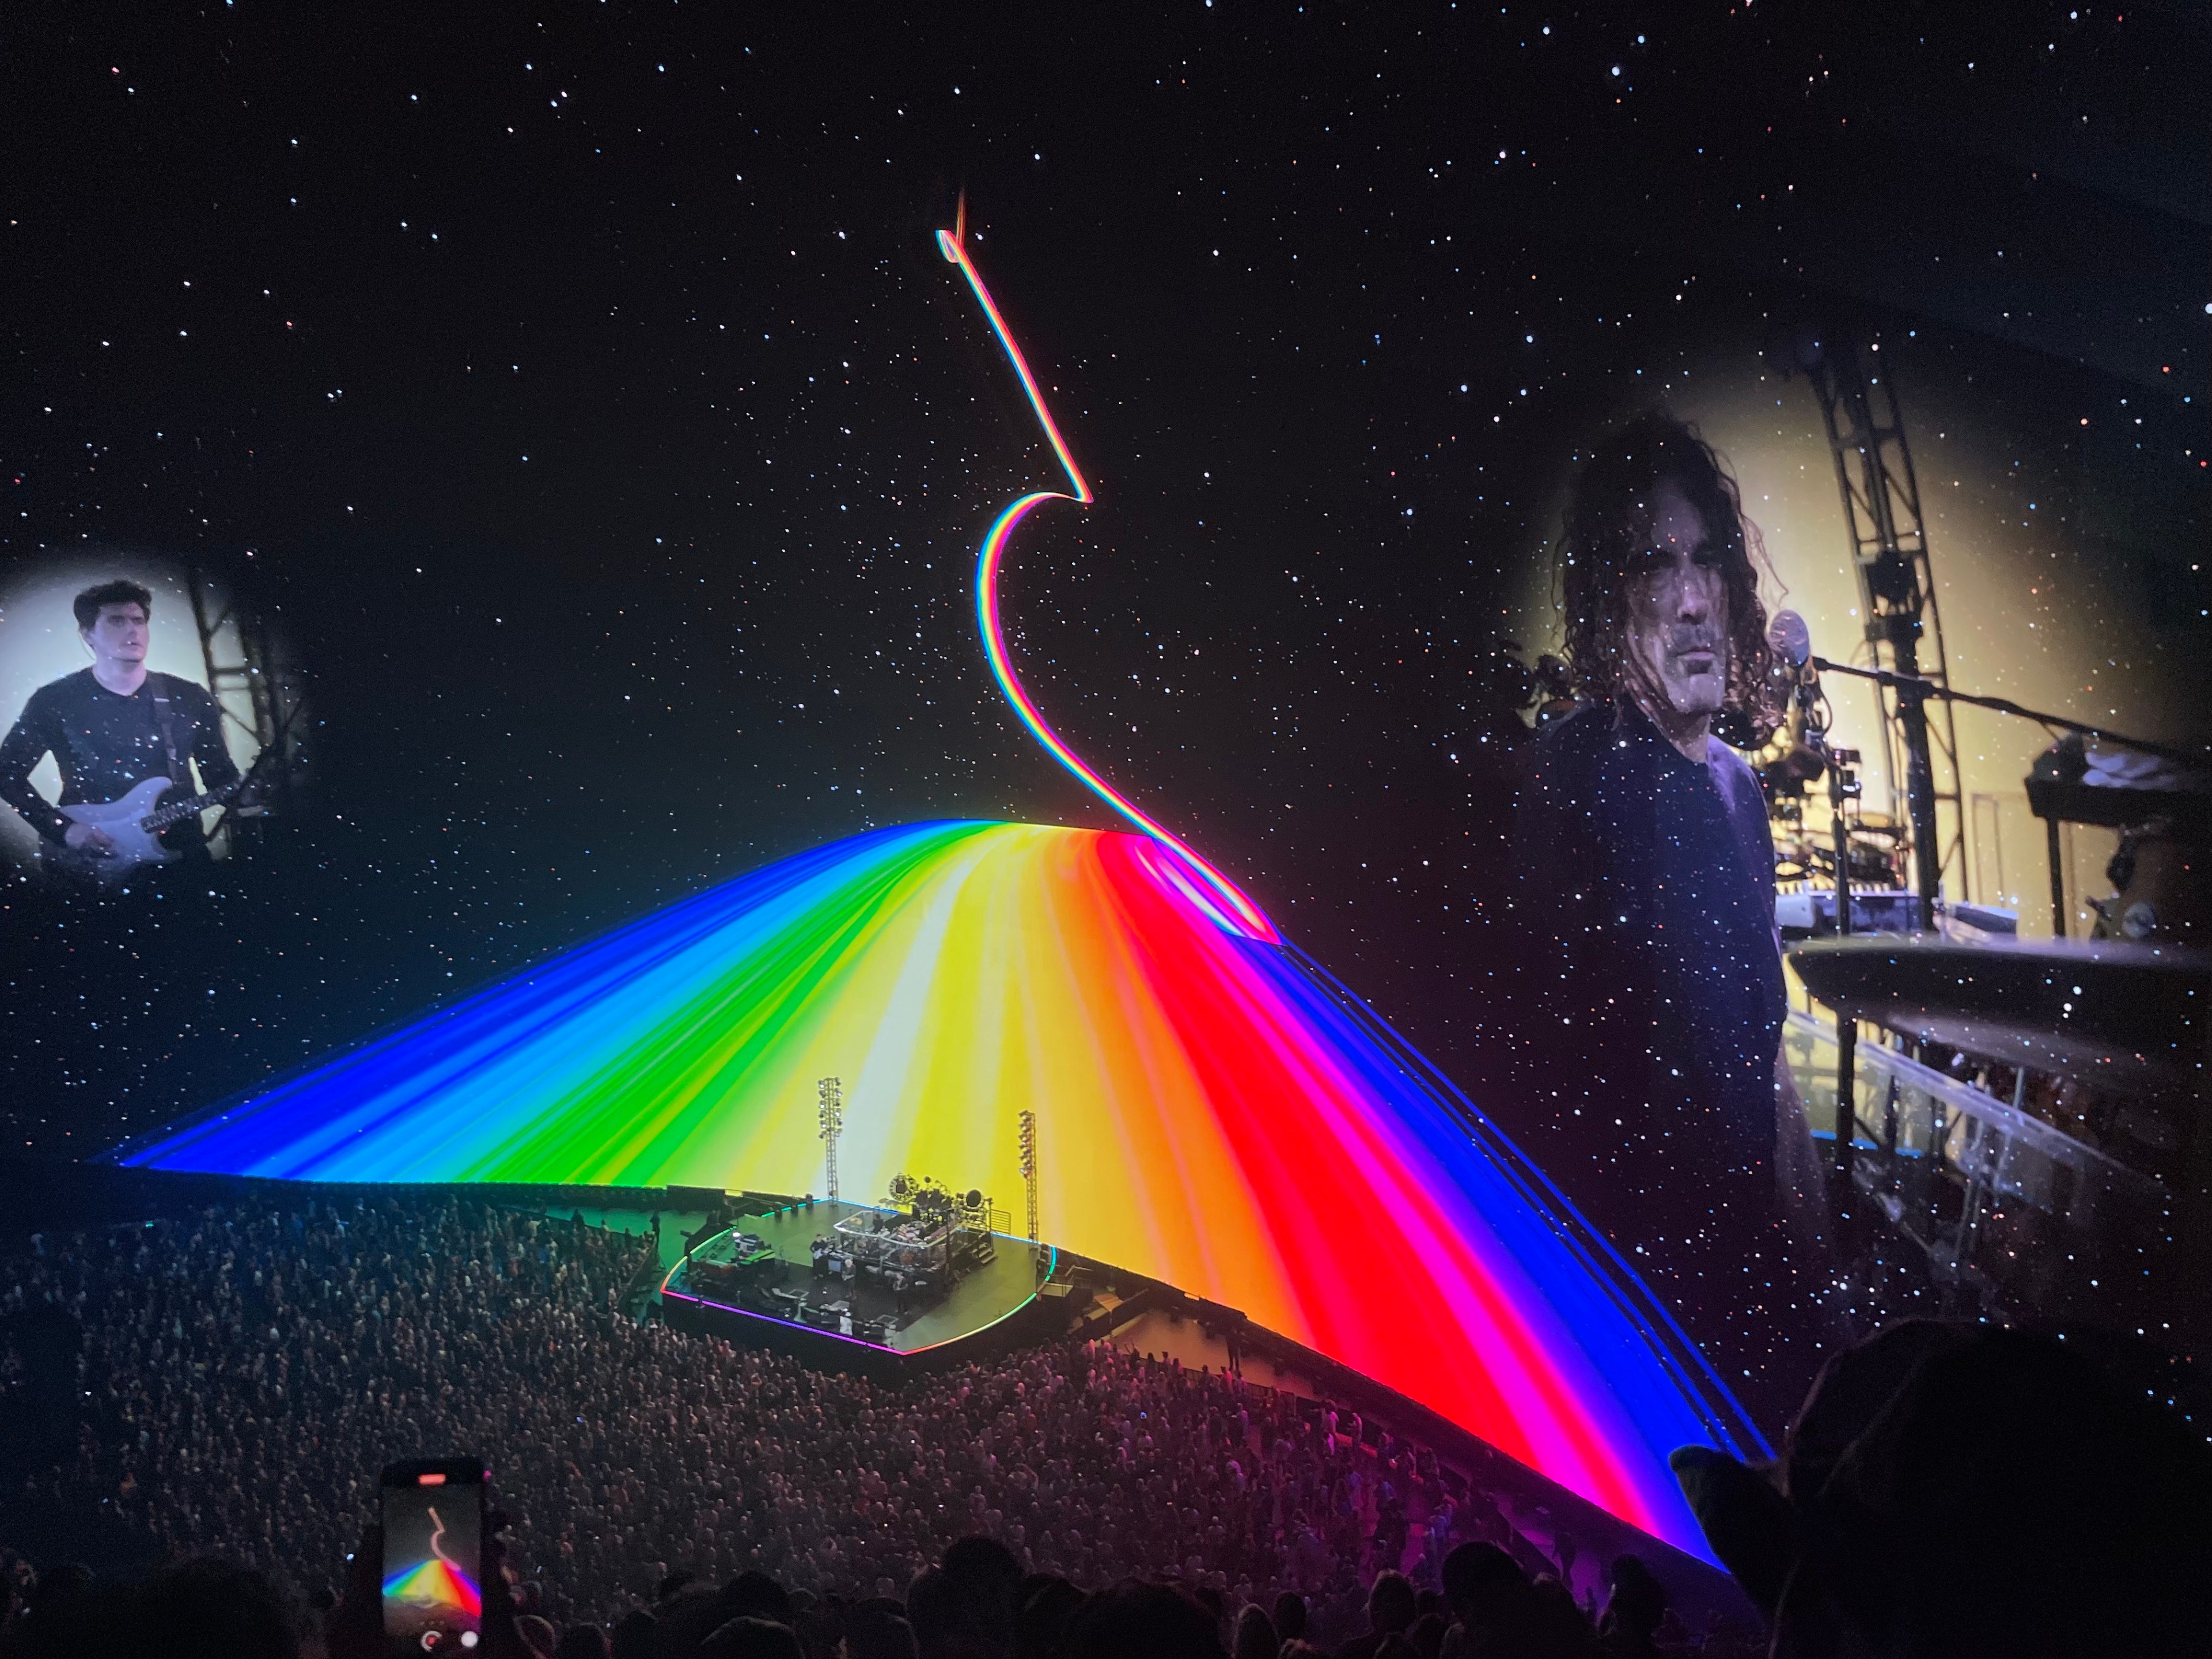 A concert stage with a large, colorful, rainbow-like light display and outer space background features images of two musicians projected on either side.